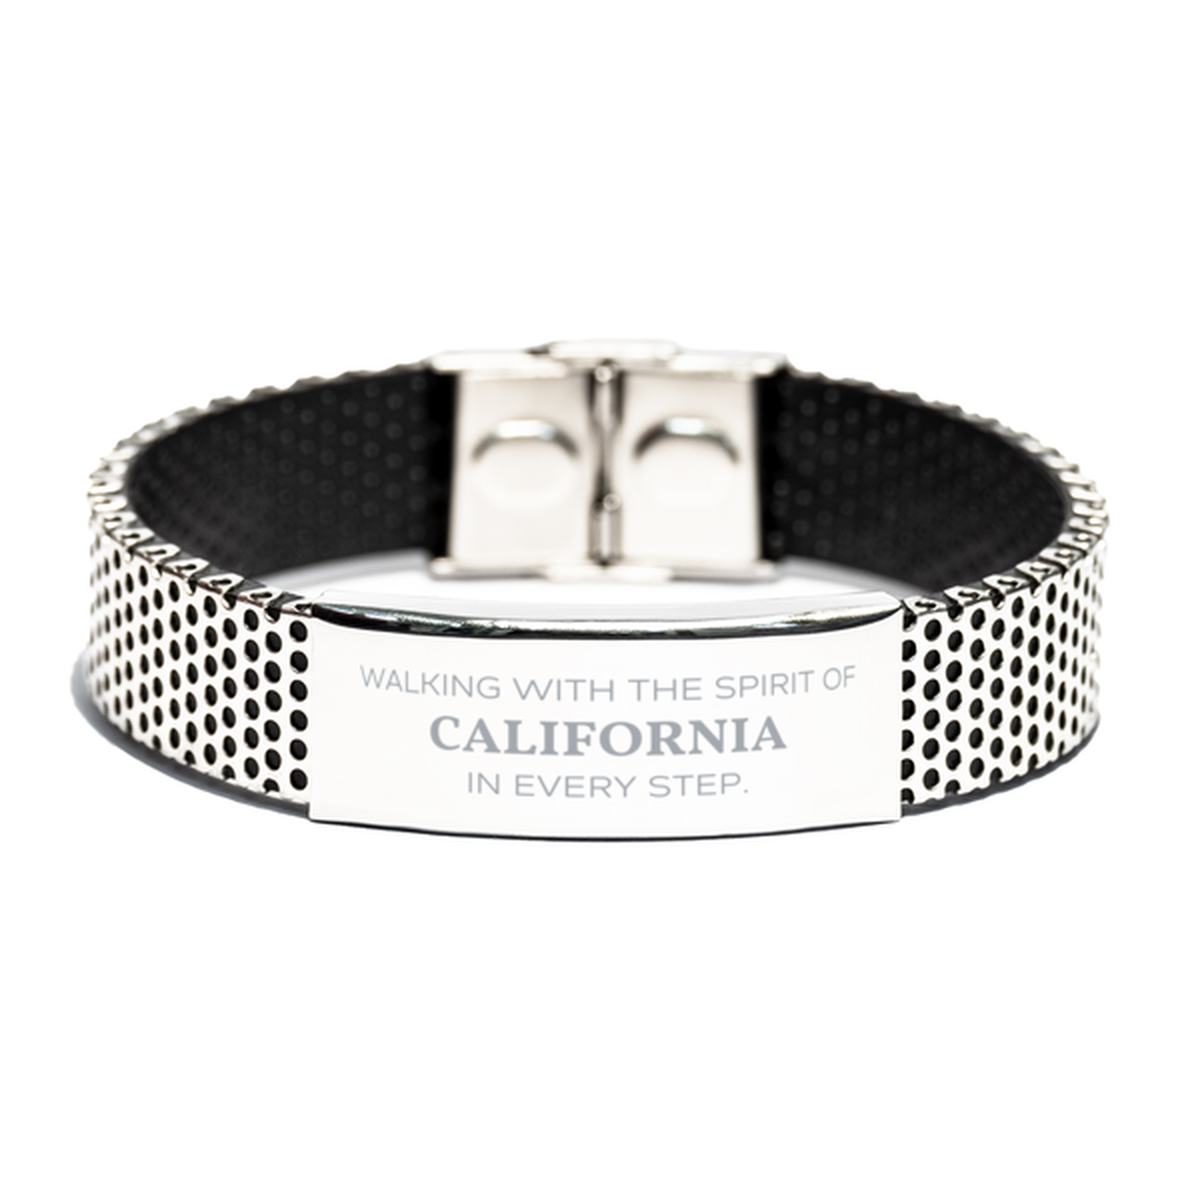 California Gifts, Walking with the spirit, Love California Birthday Christmas Stainless Steel Bracelet For California People, Men, Women, Friends